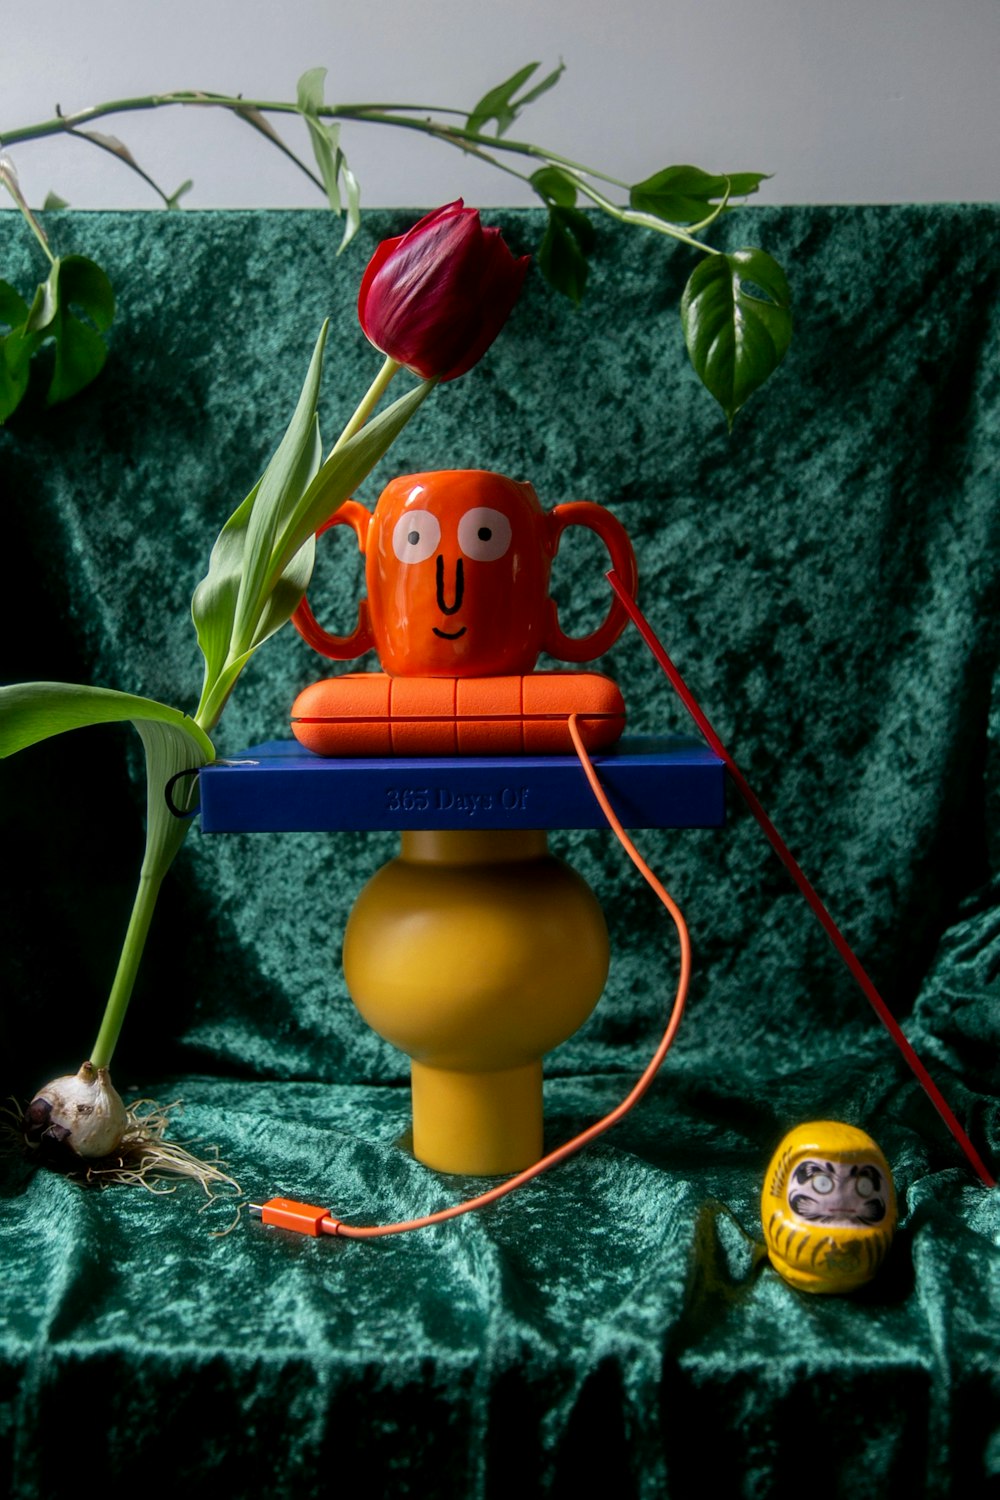 yellow and red plastic toy on green leaves